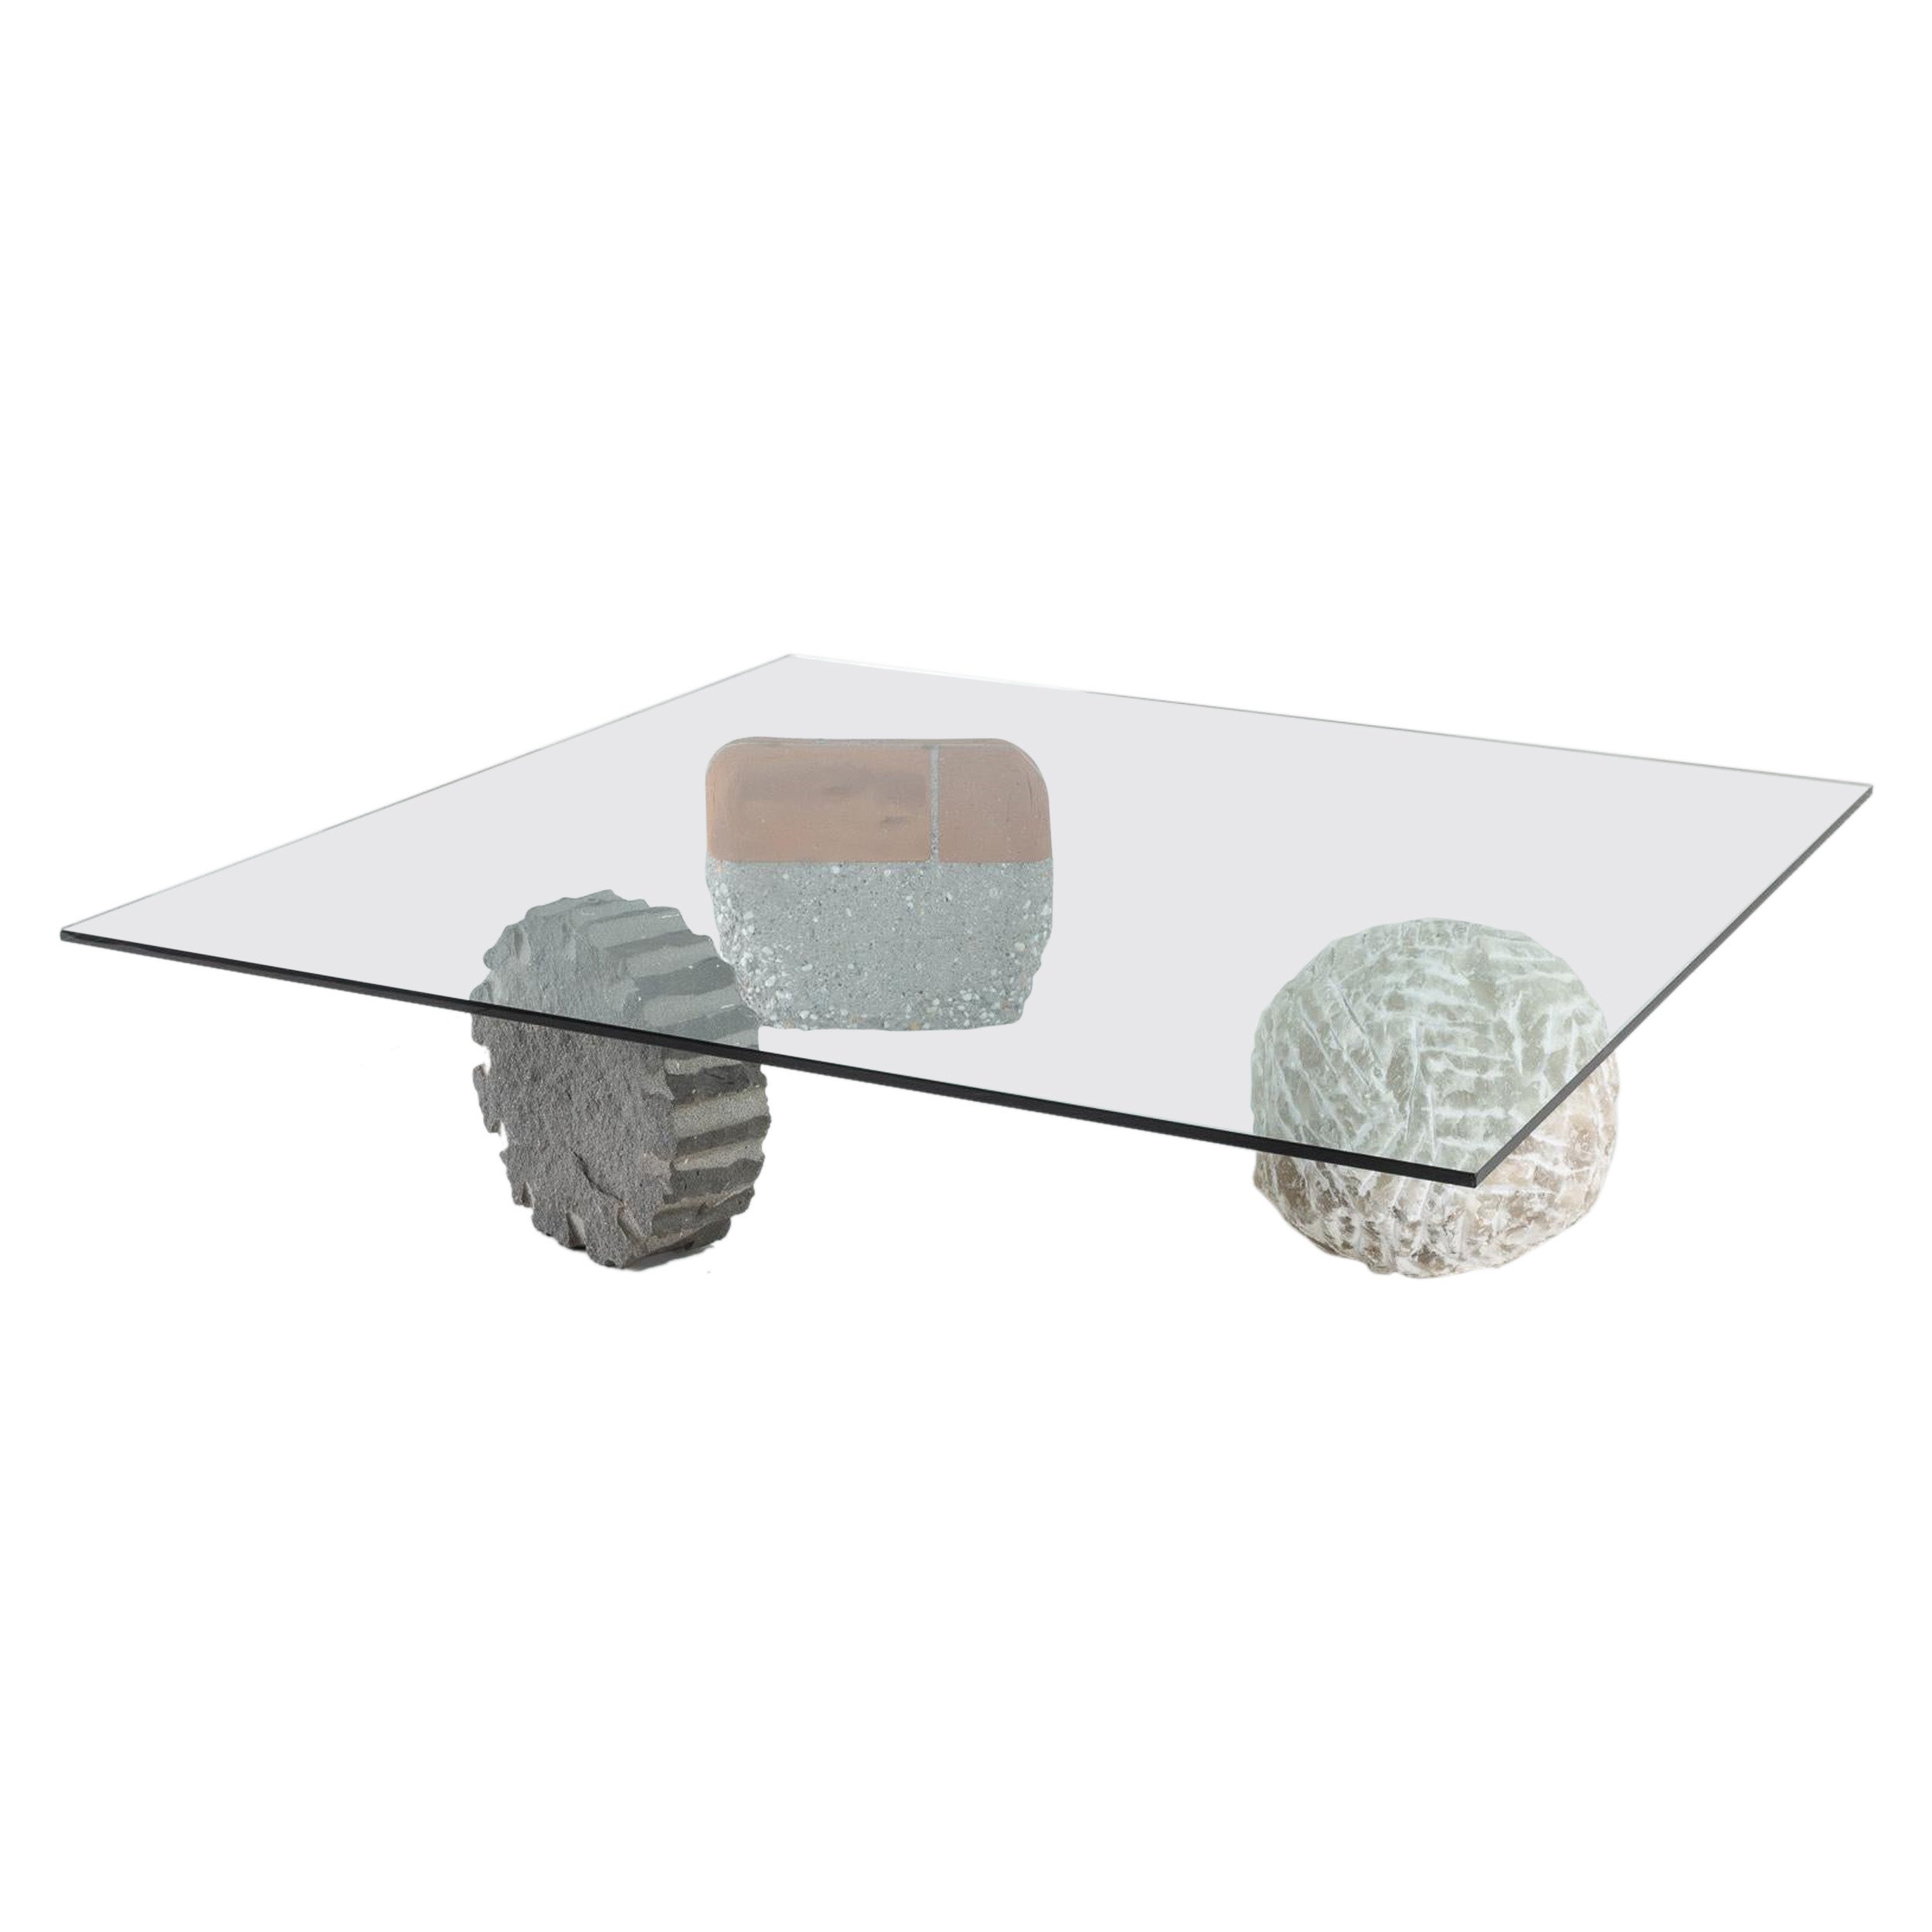 Center low table with sculptural stone feet and glass top - Casigliani Italy 80s